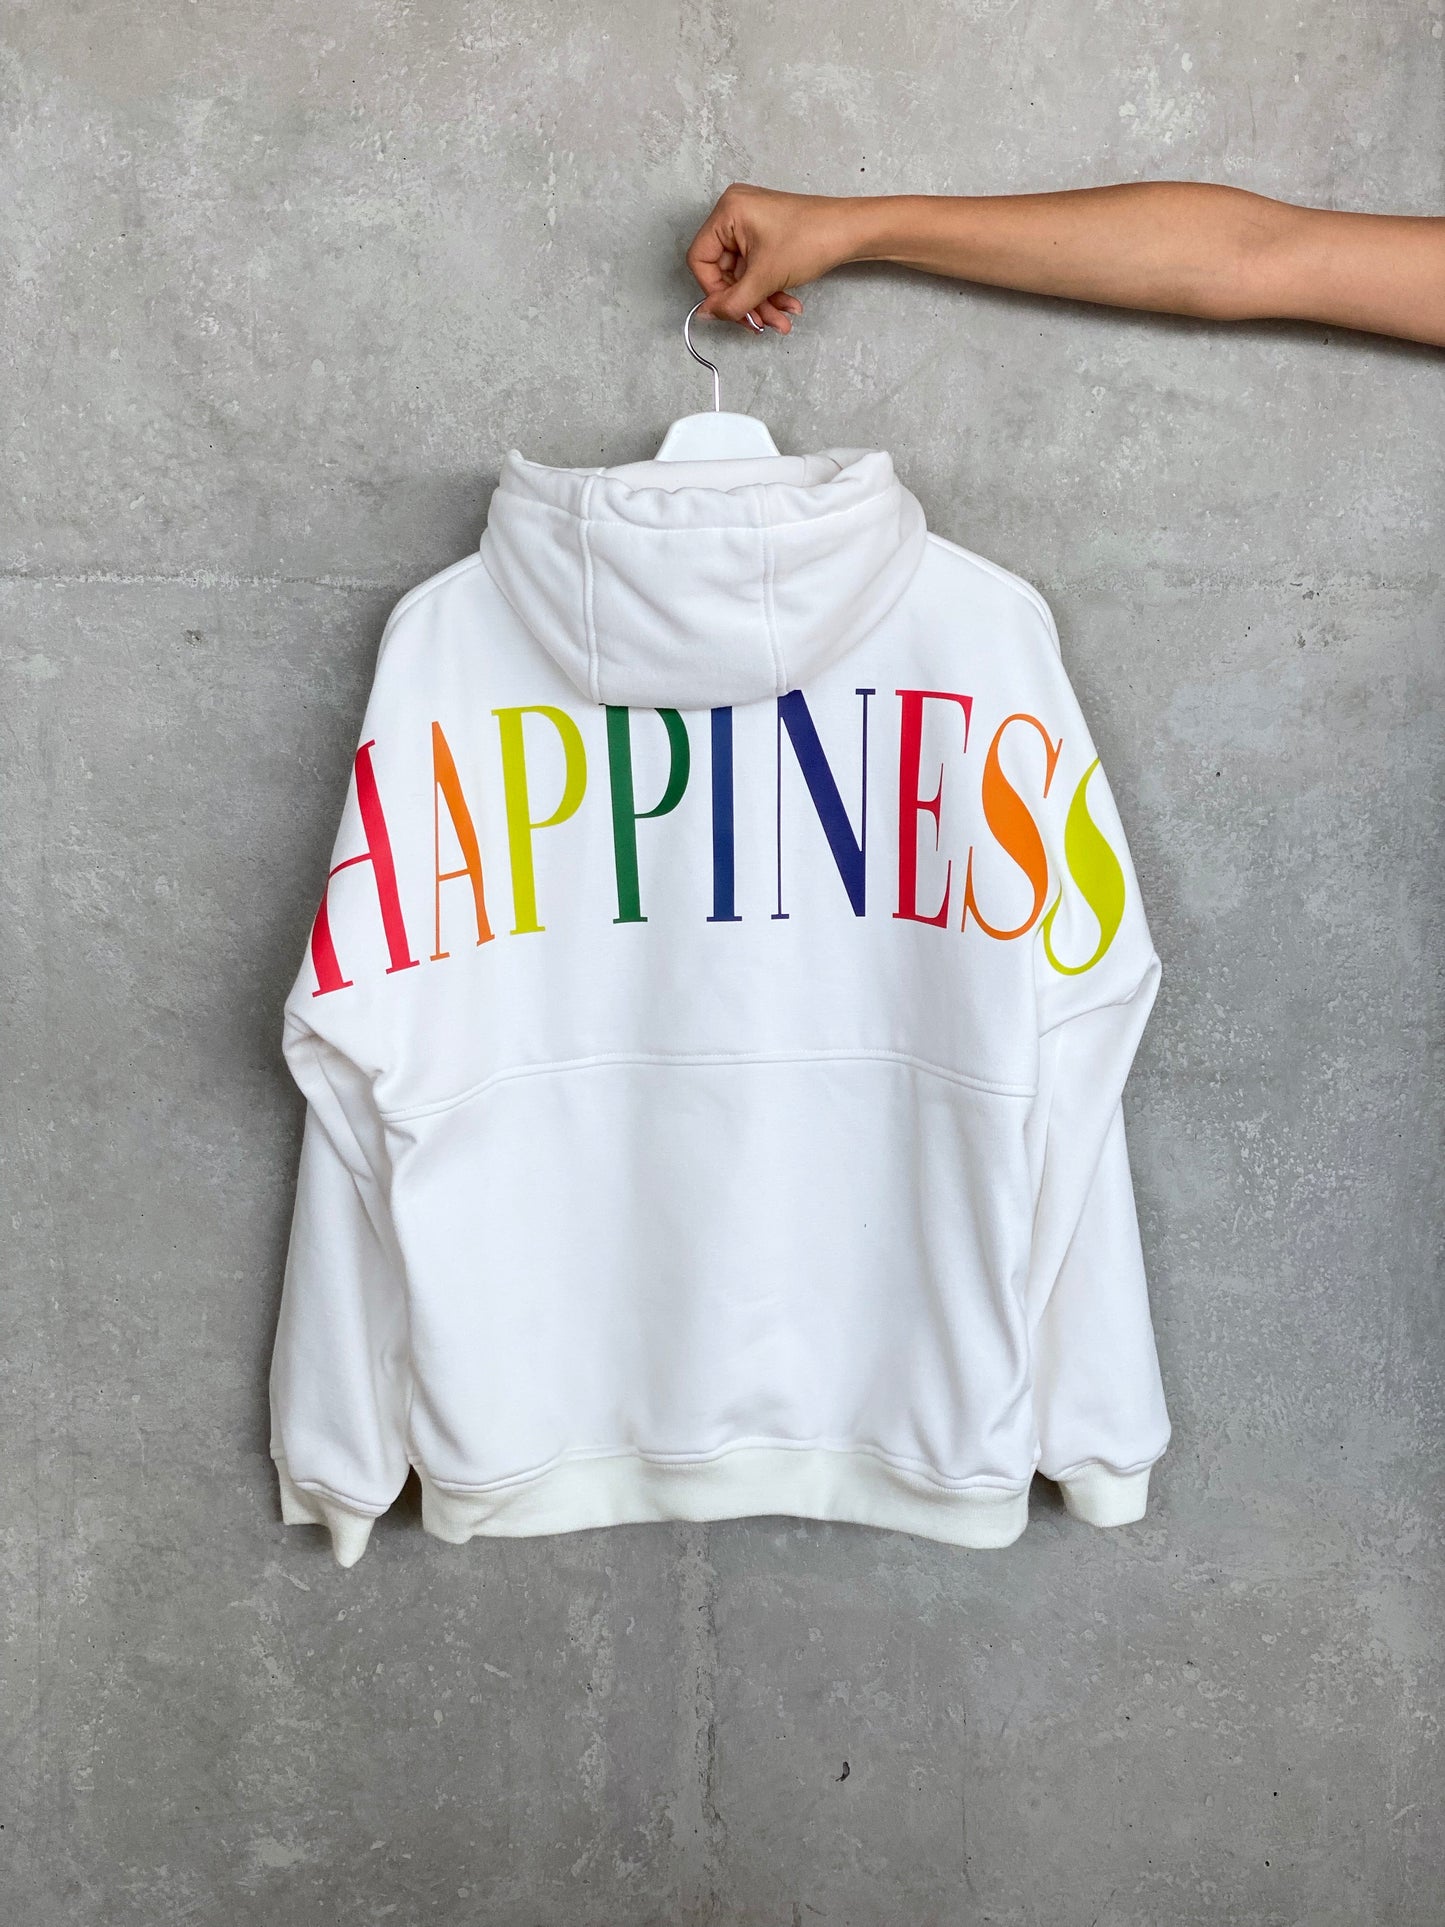 Perfecto Imperfecto Hoodie Happiness #58 Talla S/M